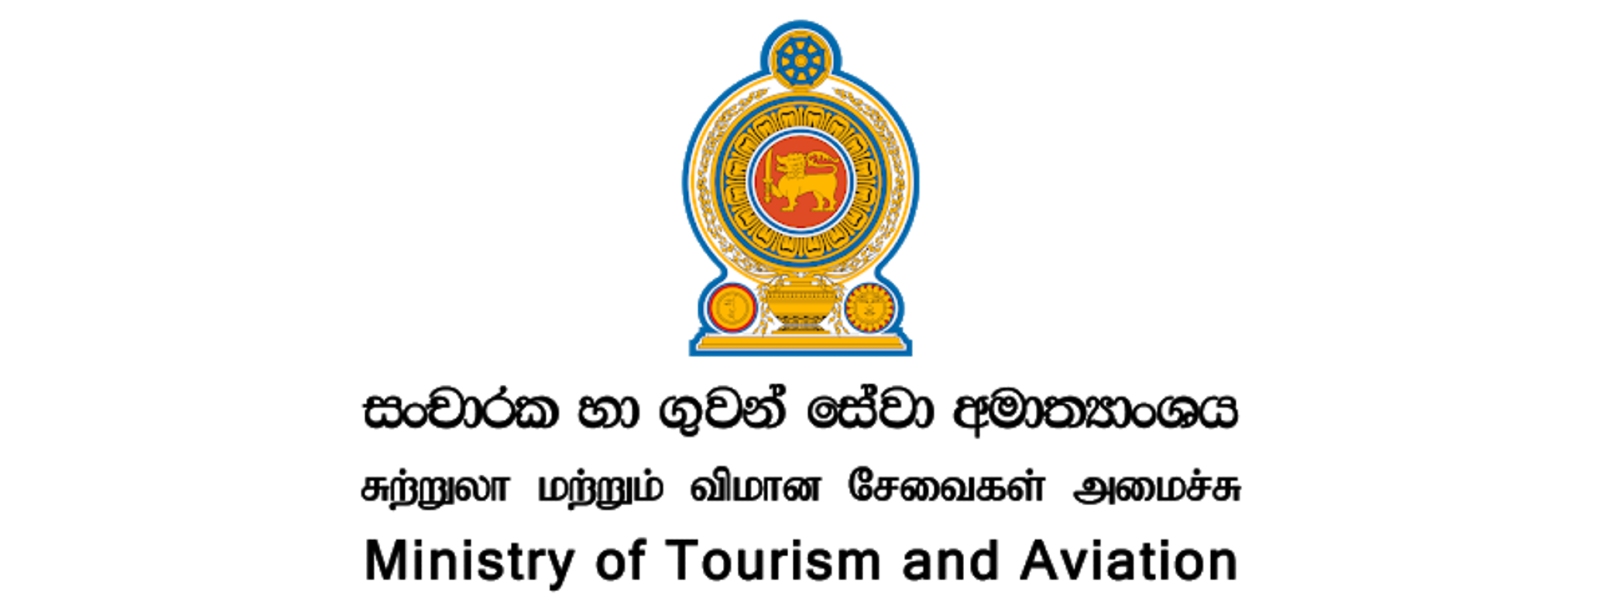 Tourists negative of COVID-19 allowed to visit SL